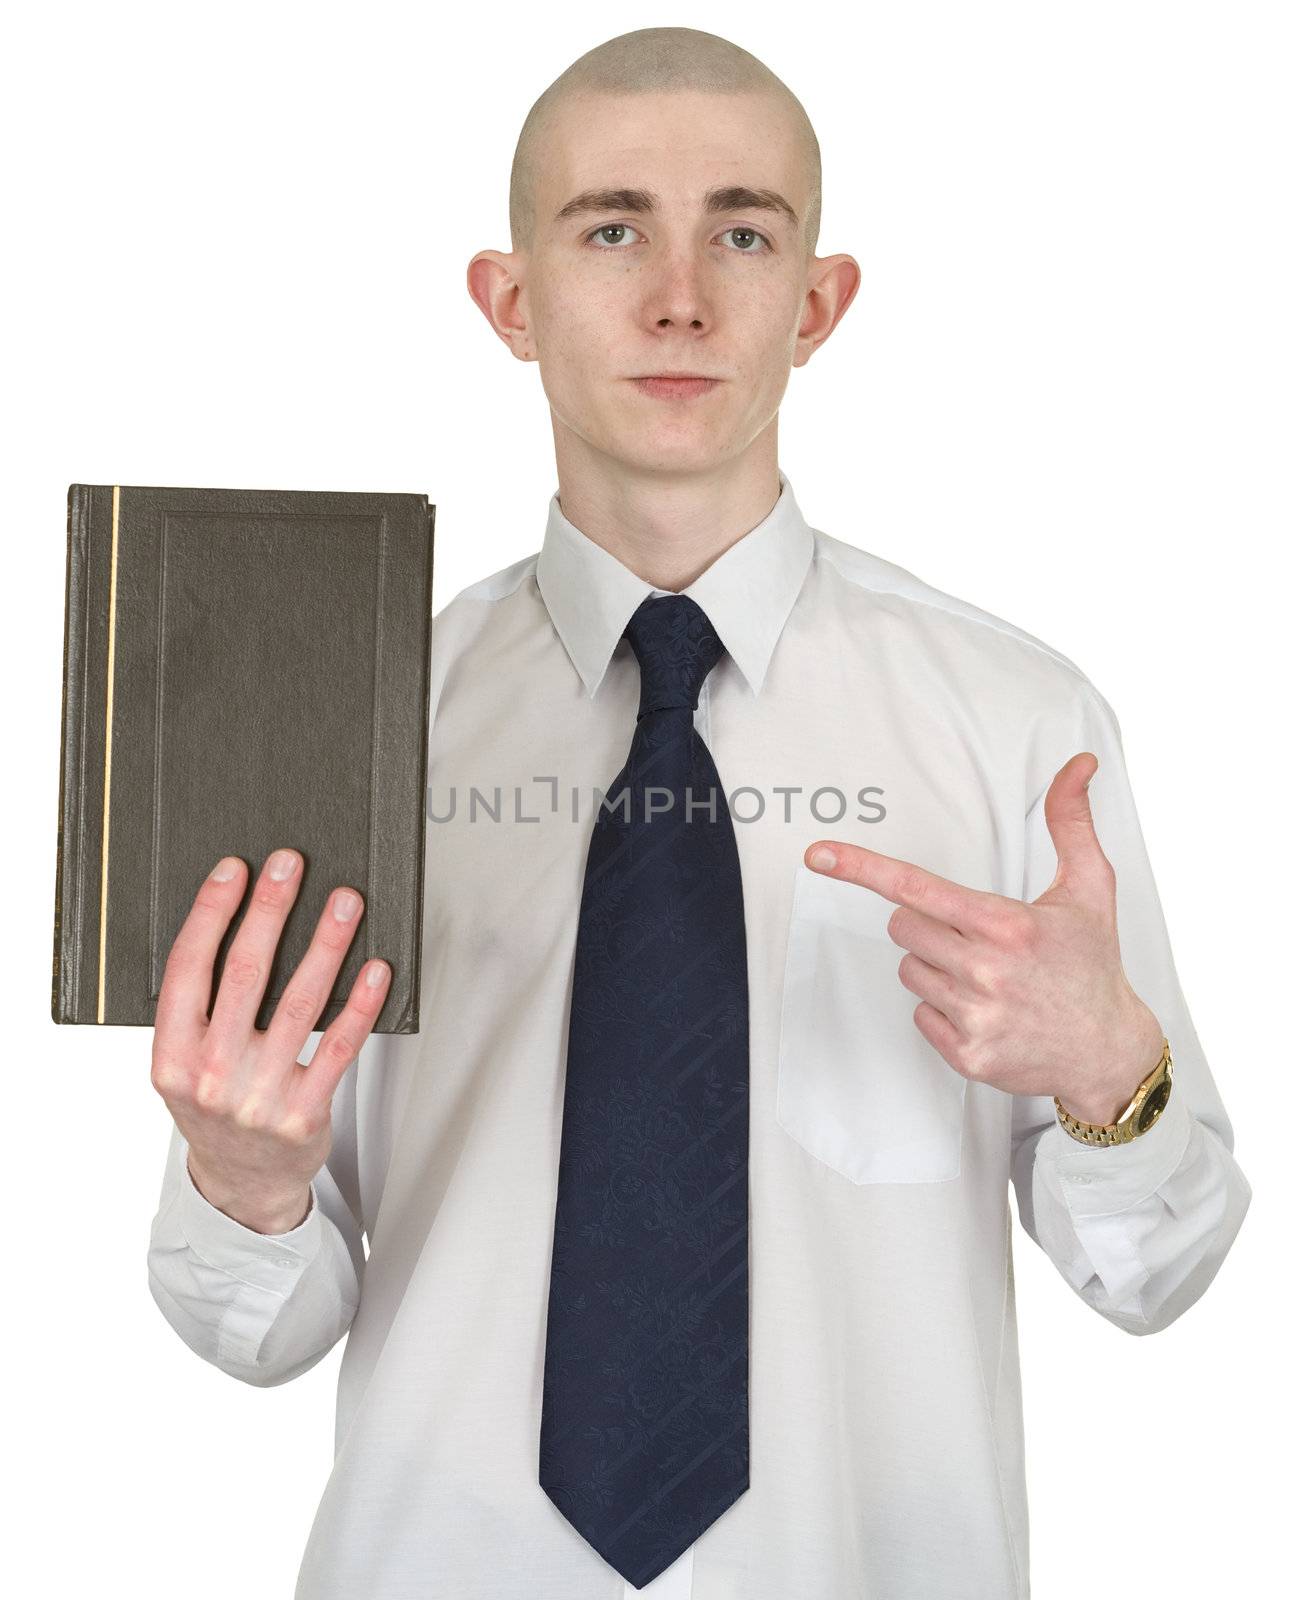 The person with the big book in hands